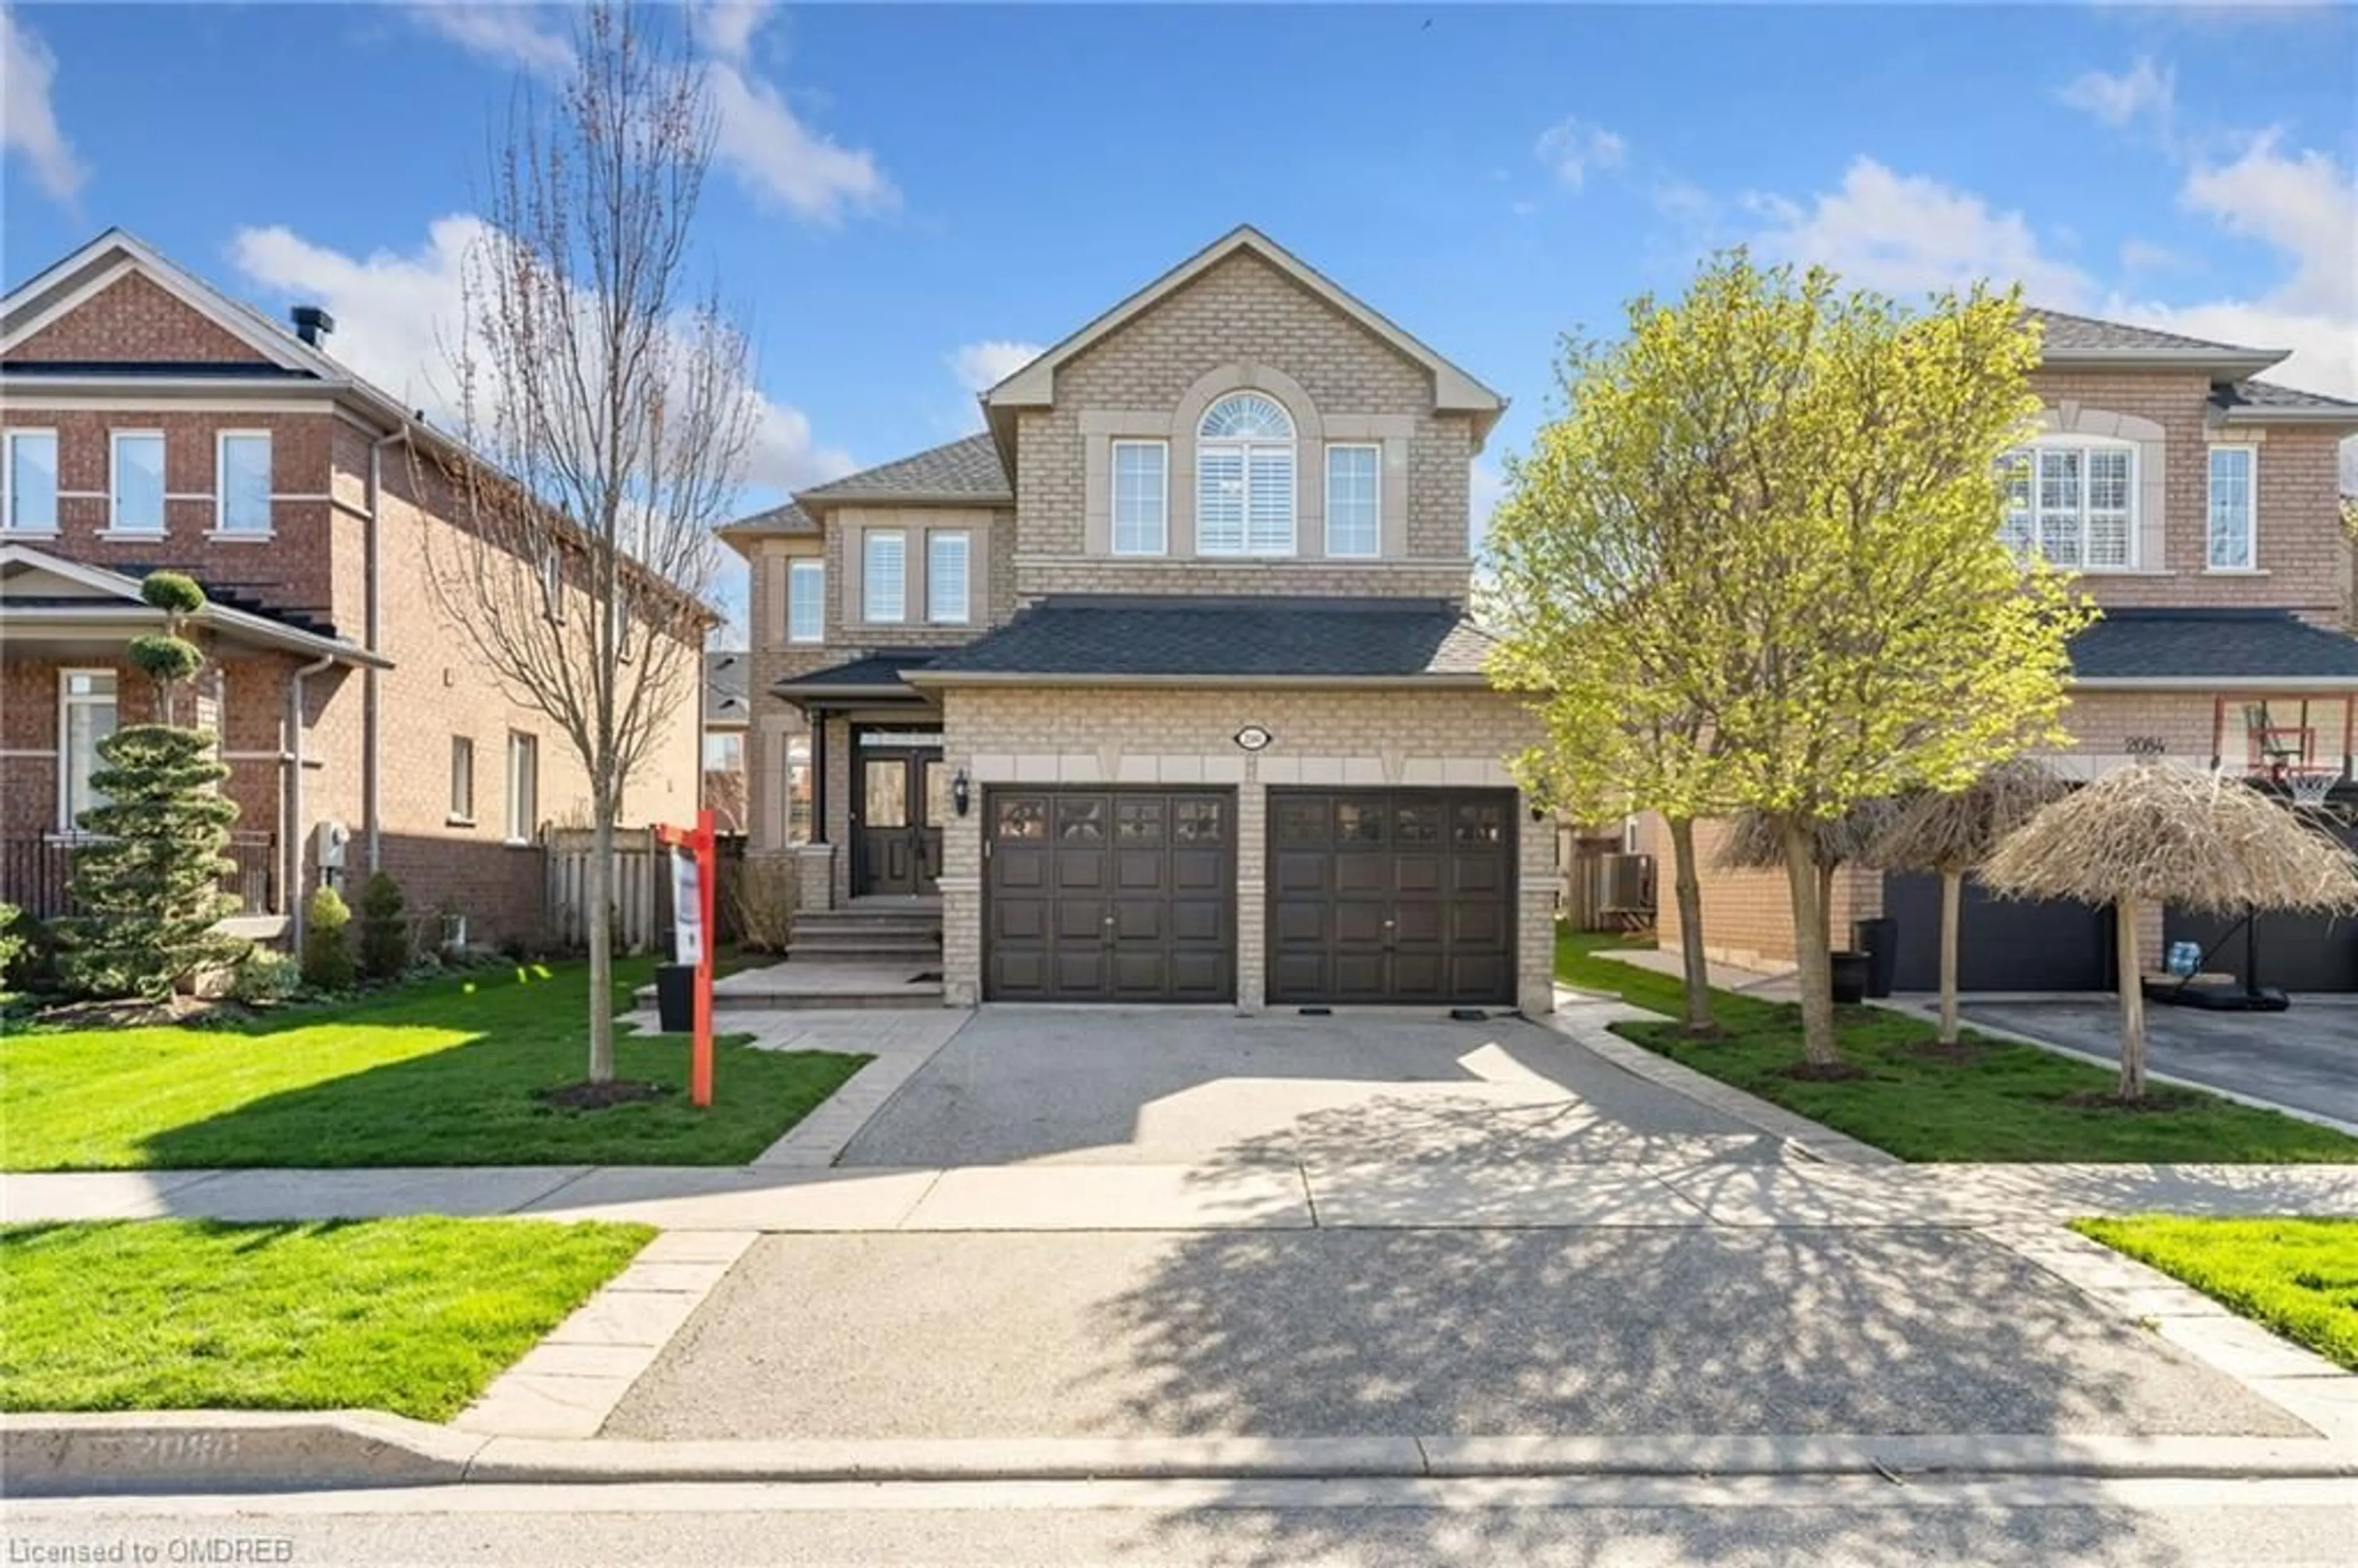 Frontside or backside of a home for 2080 Forestview Trail, Oakville Ontario L6M 3W4